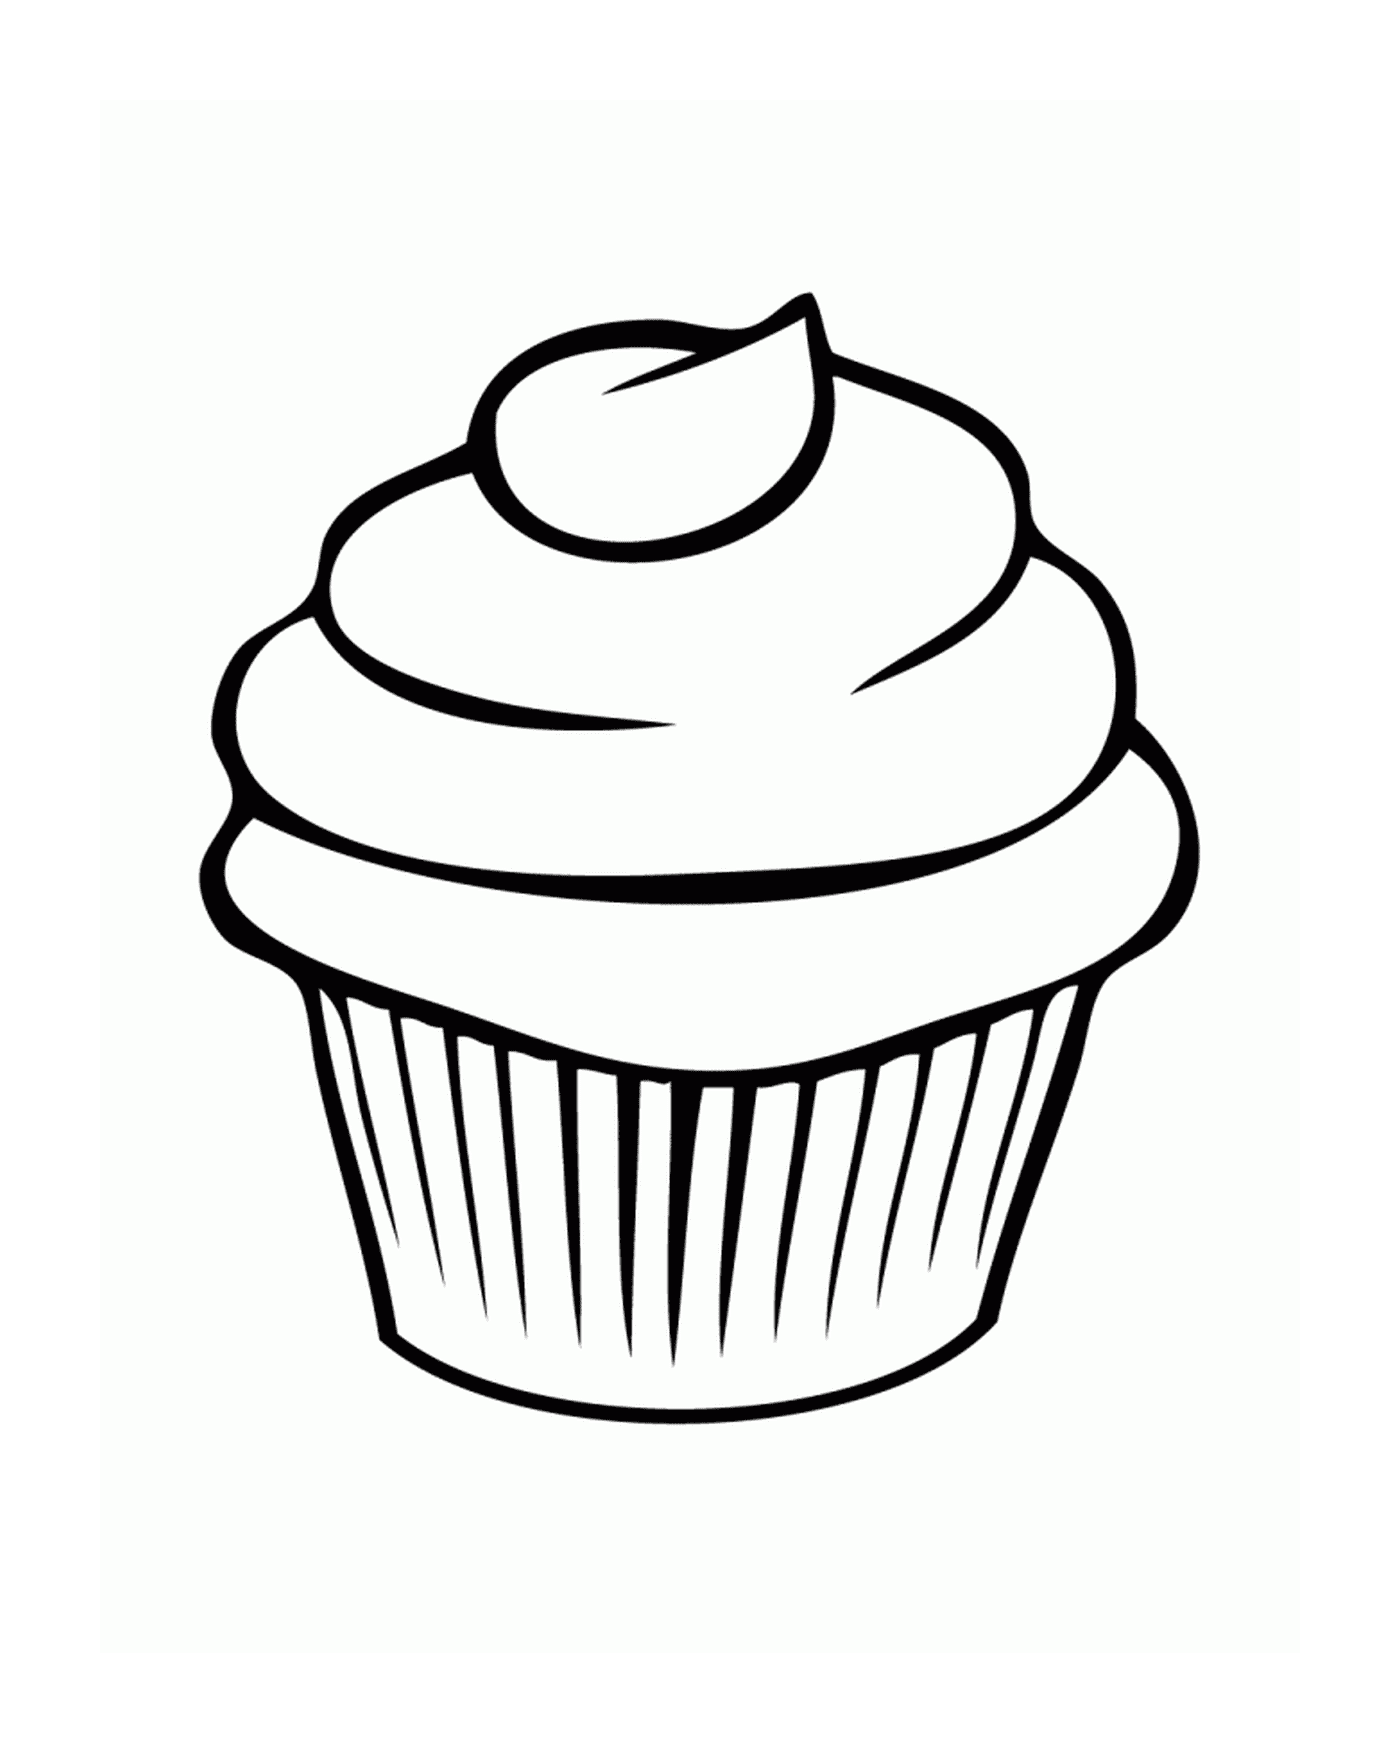  A simple and easy cupcake 